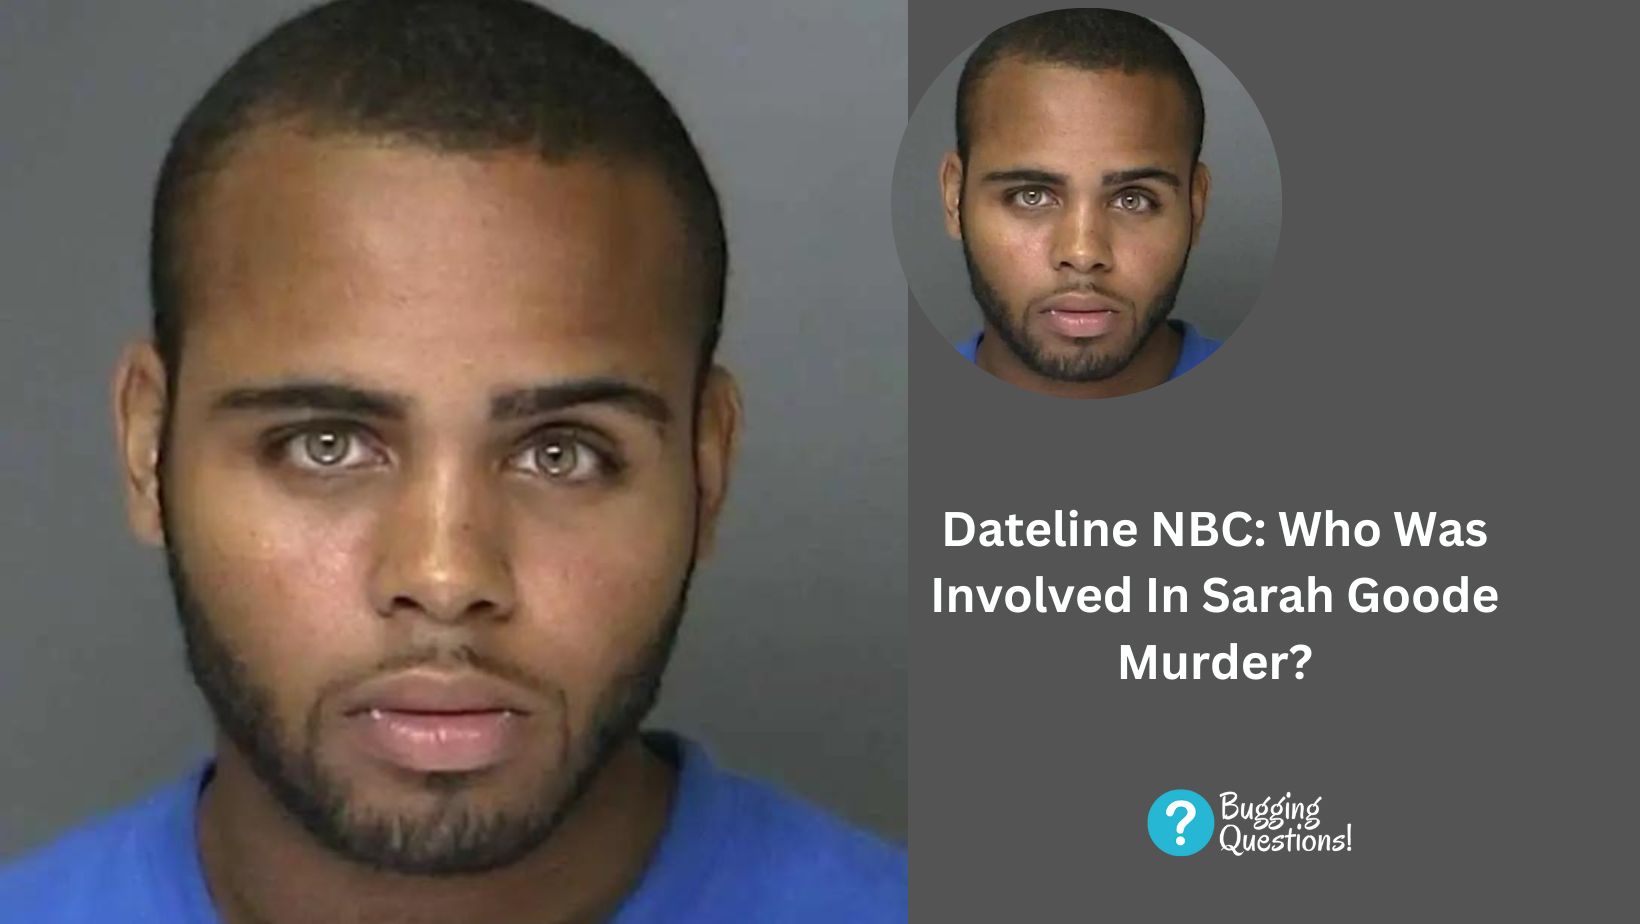 Dateline NBC: Who Was Involved In Sarah Goode Murder?